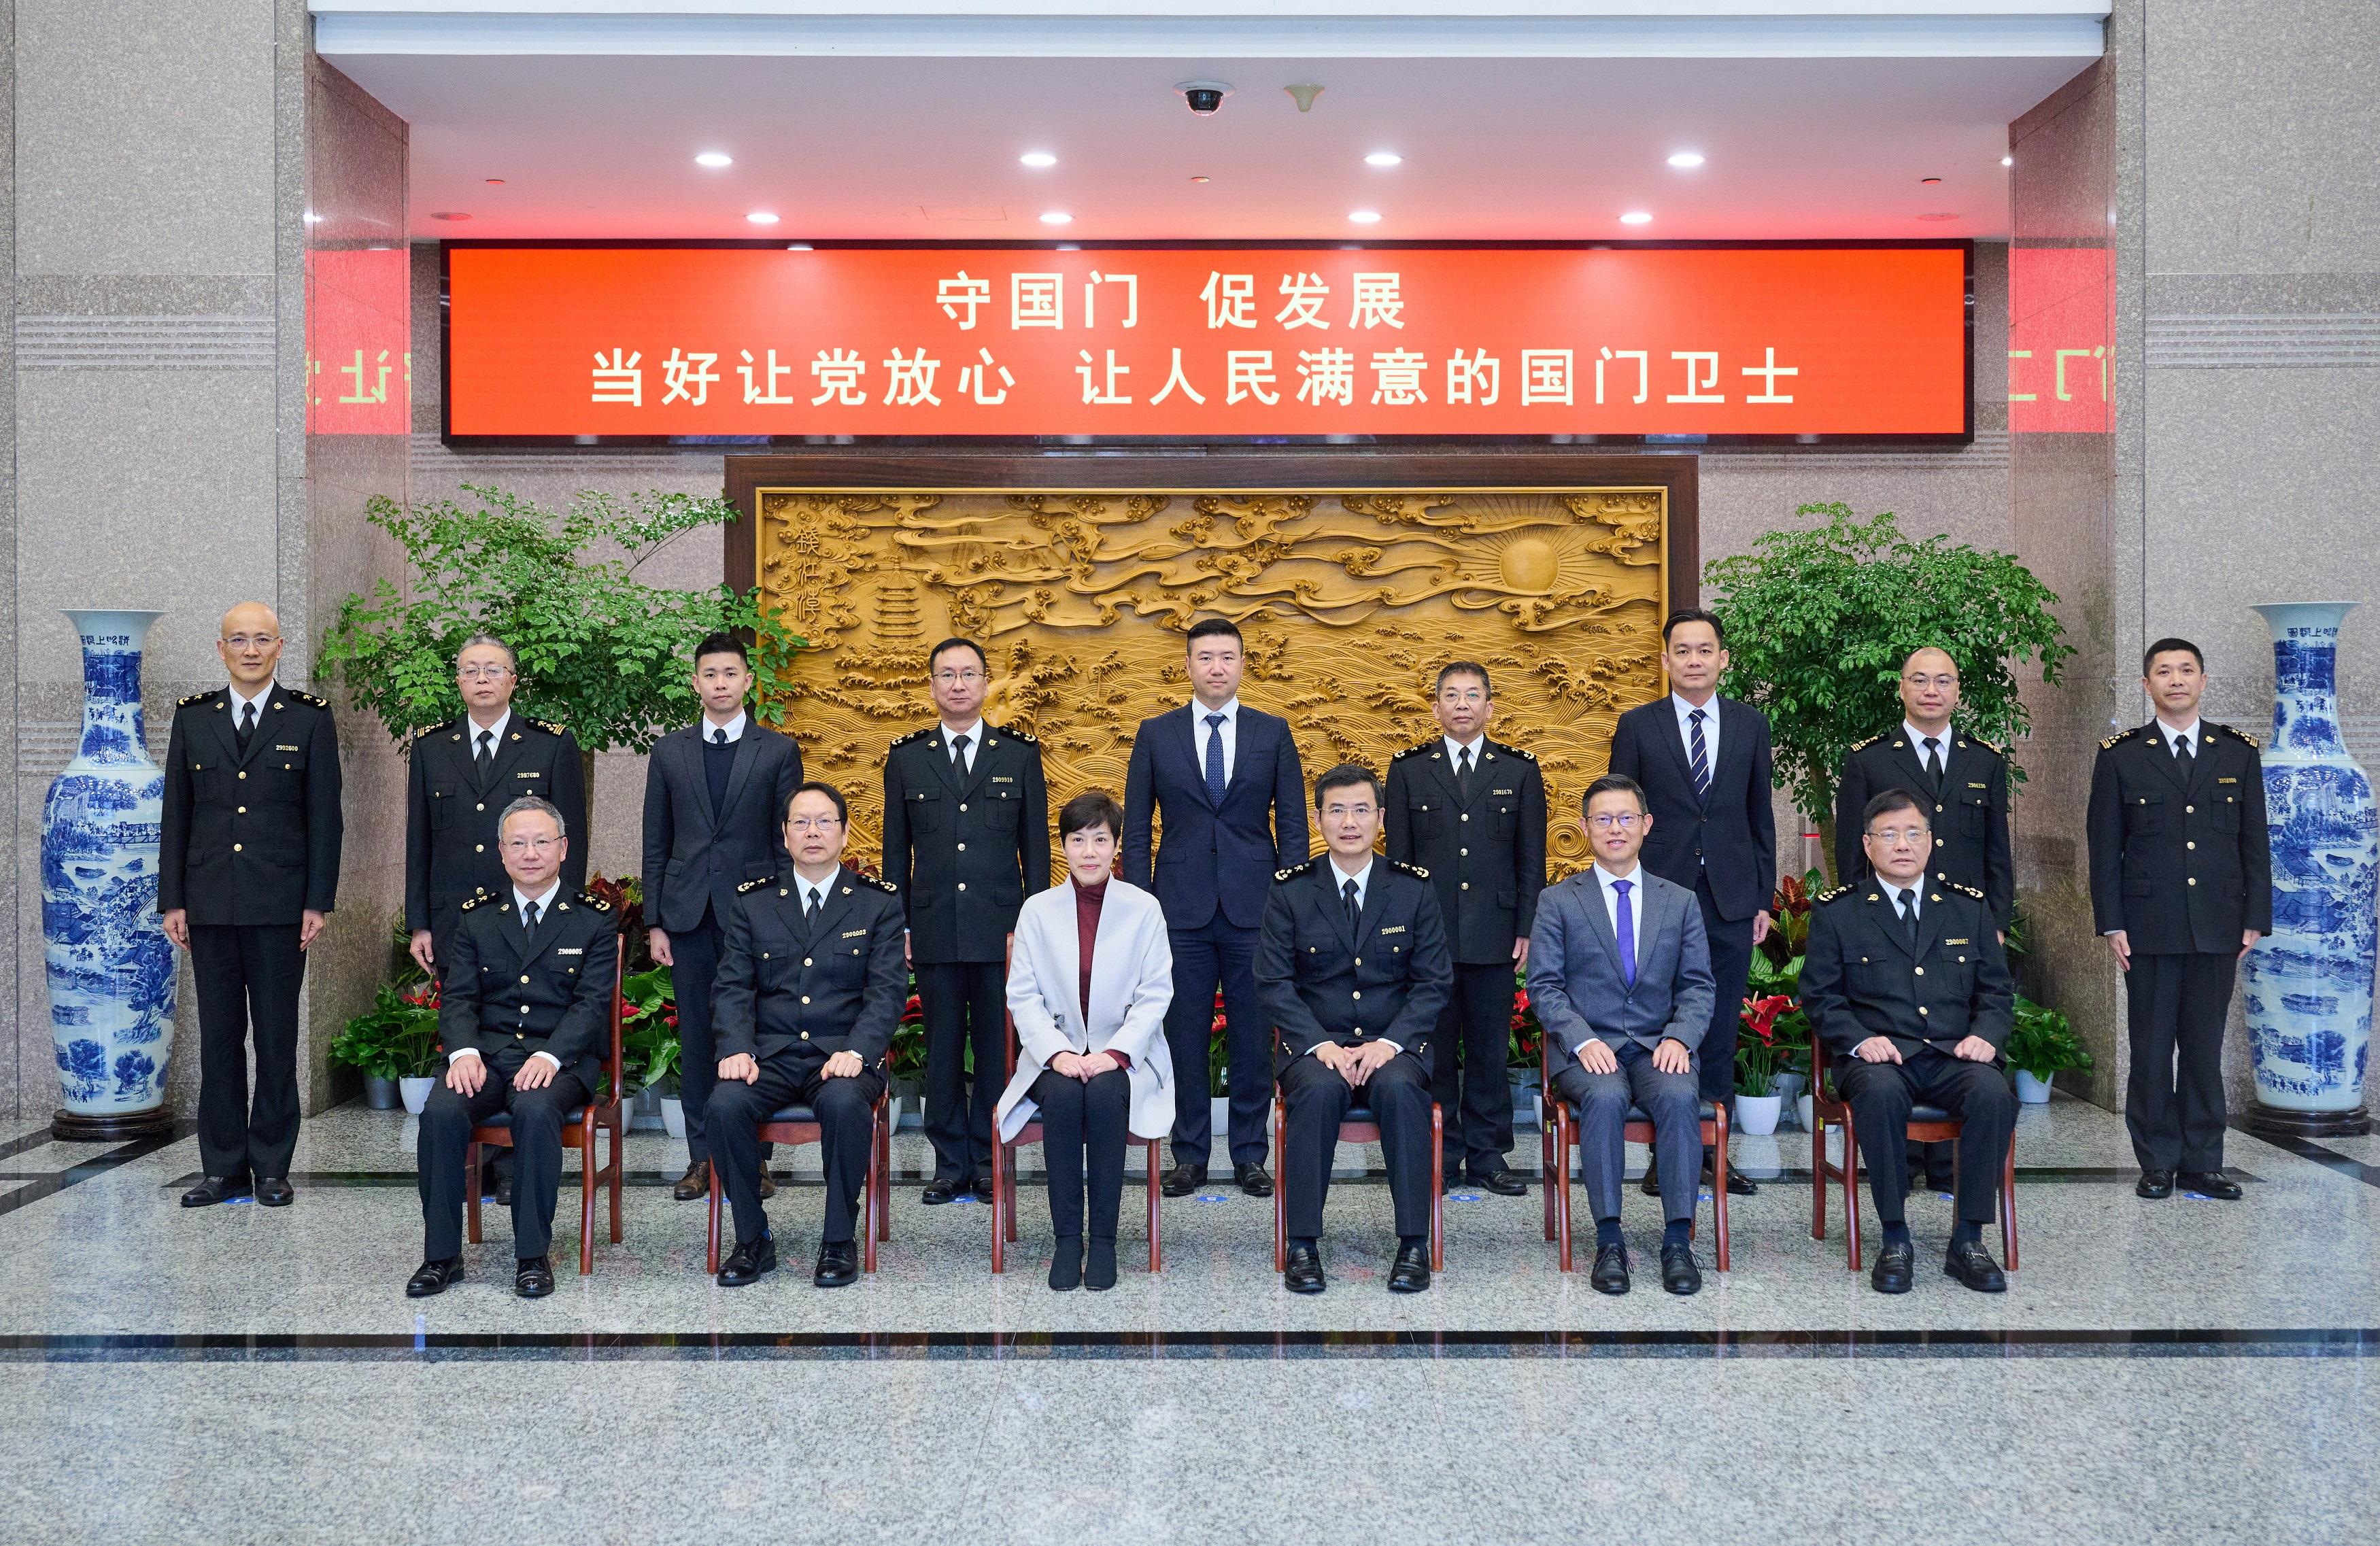 The Commissioner of Customs and Excise, Ms Louise Ho, met with the Director General in the Hangzhou Customs District, Mr Wang Wei, on December 10. Photo shows Ms Ho (front row, third left); Mr Wang (front row, third right); the Assistant Commissioner (Excise and Strategic Support), Mr Rudy Hui (front row, second right); members of the Hong Kong Customs delegation and officers of the Hangzhou Customs District.
